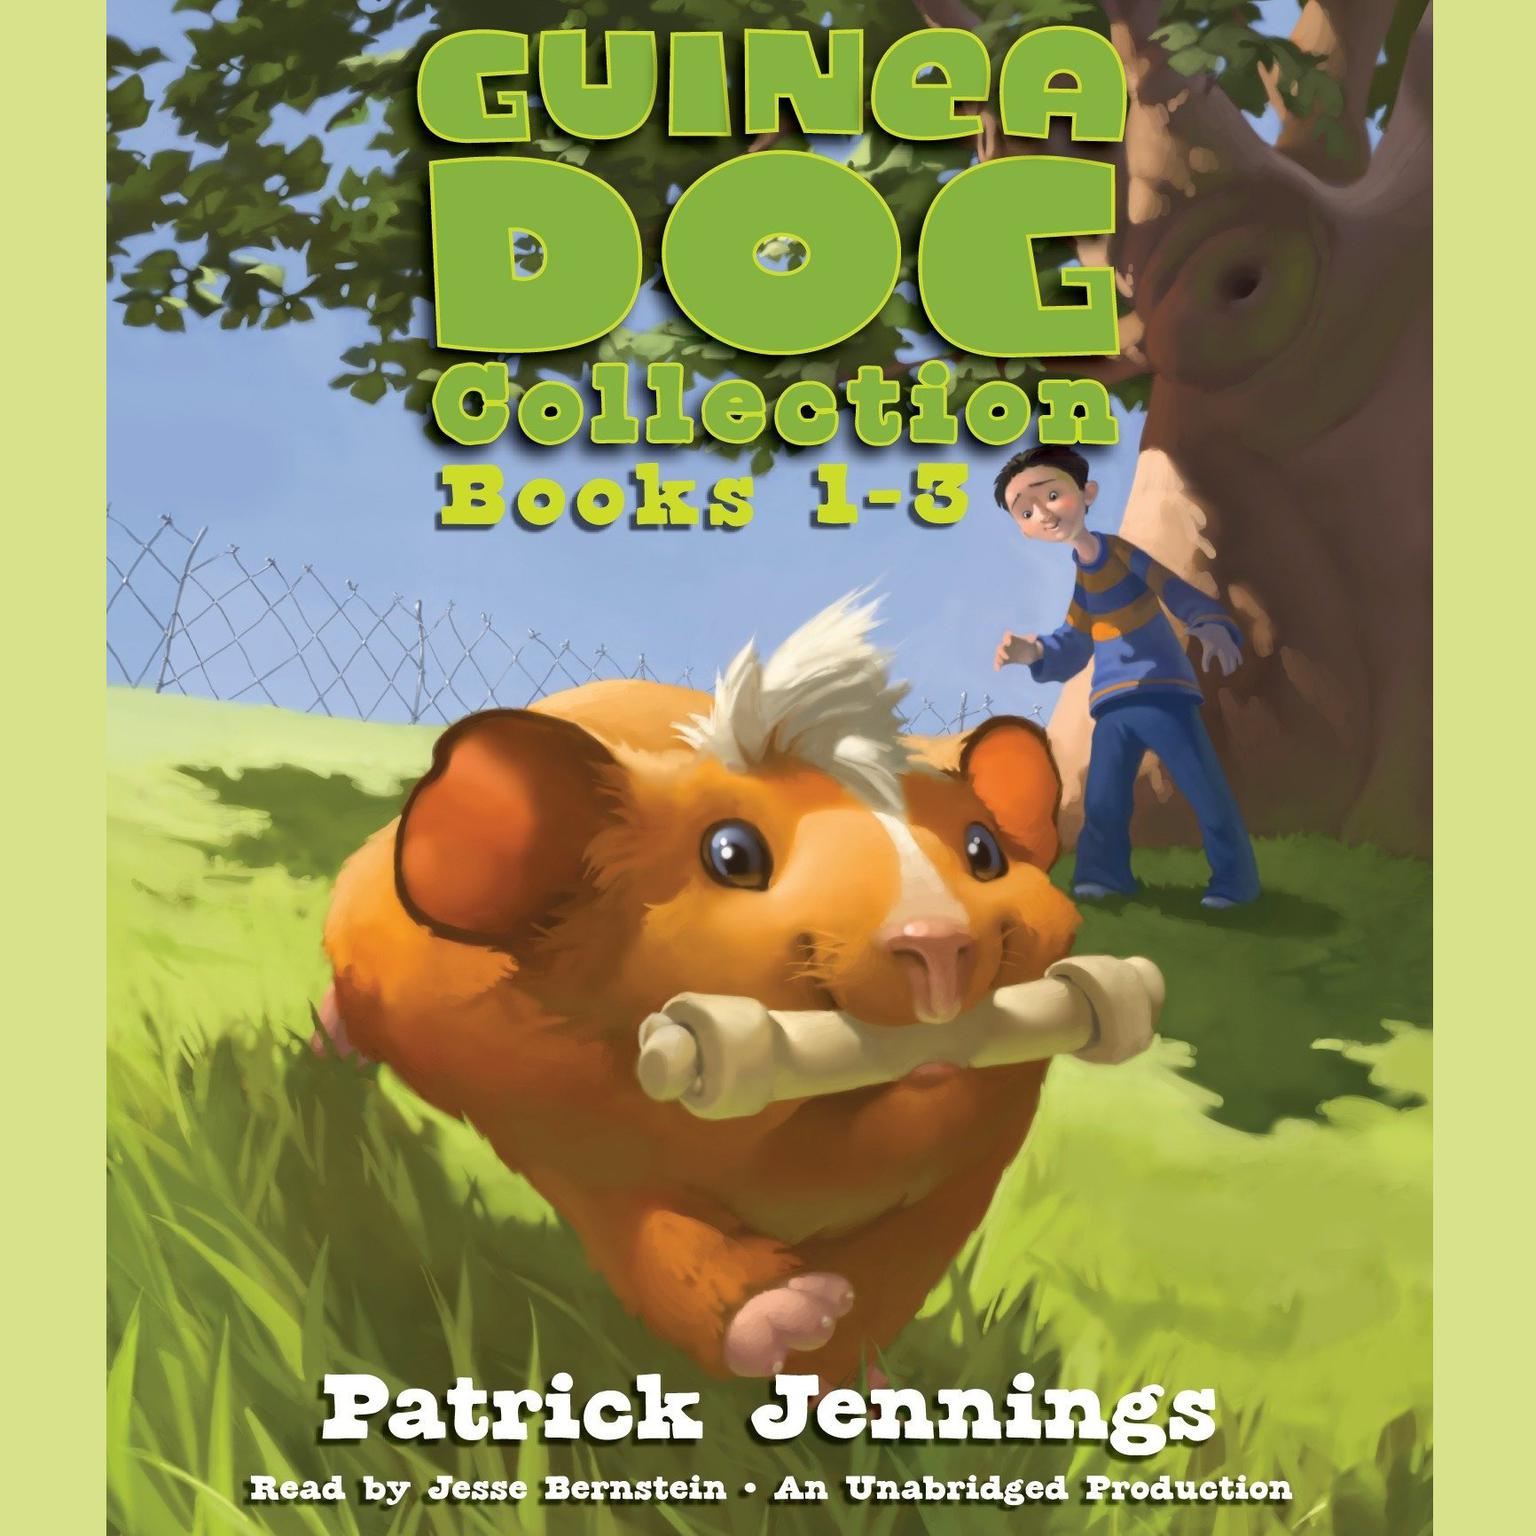 Guinea Dog Collection: Books 1-3: Books 1-3 Audiobook, by Patrick Jennings